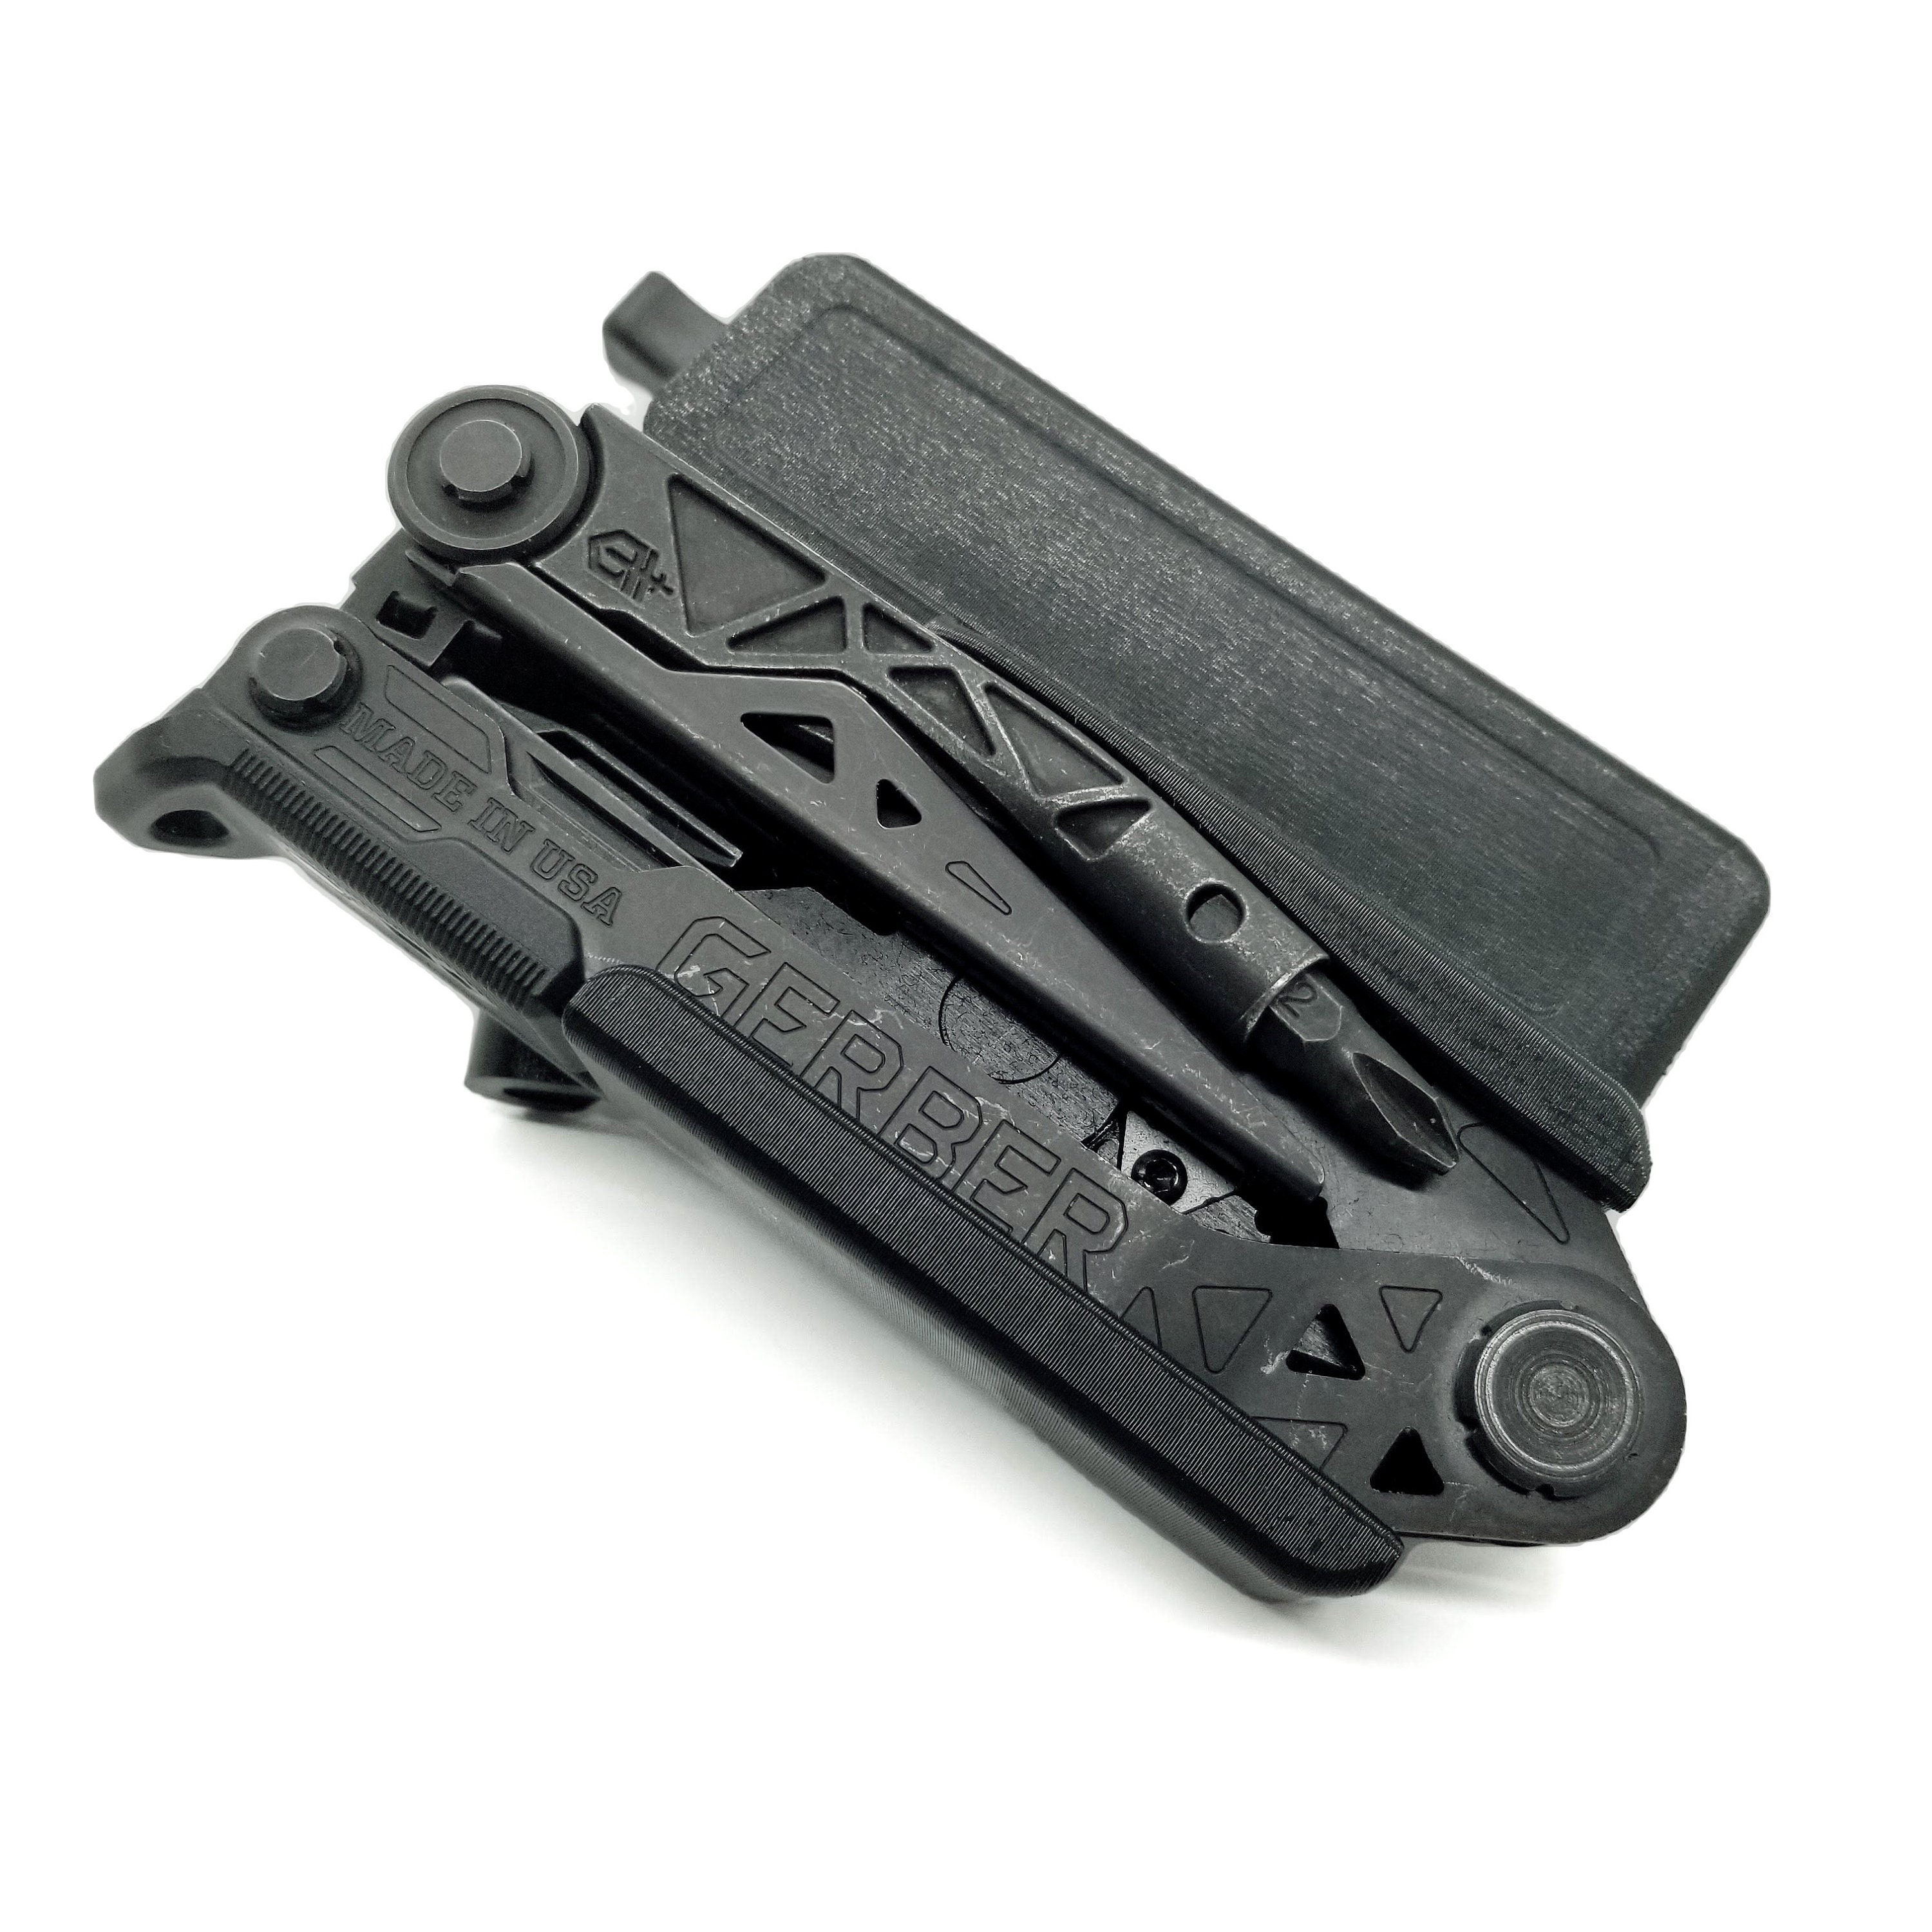  Kydex Multitool Sheath for LEATHERMAN Arc - Made in USA - Multi  Tool Sheath Holder Cover Belt Pocket Holster - Multi-Tool not Included  (Black) : Tools & Home Improvement